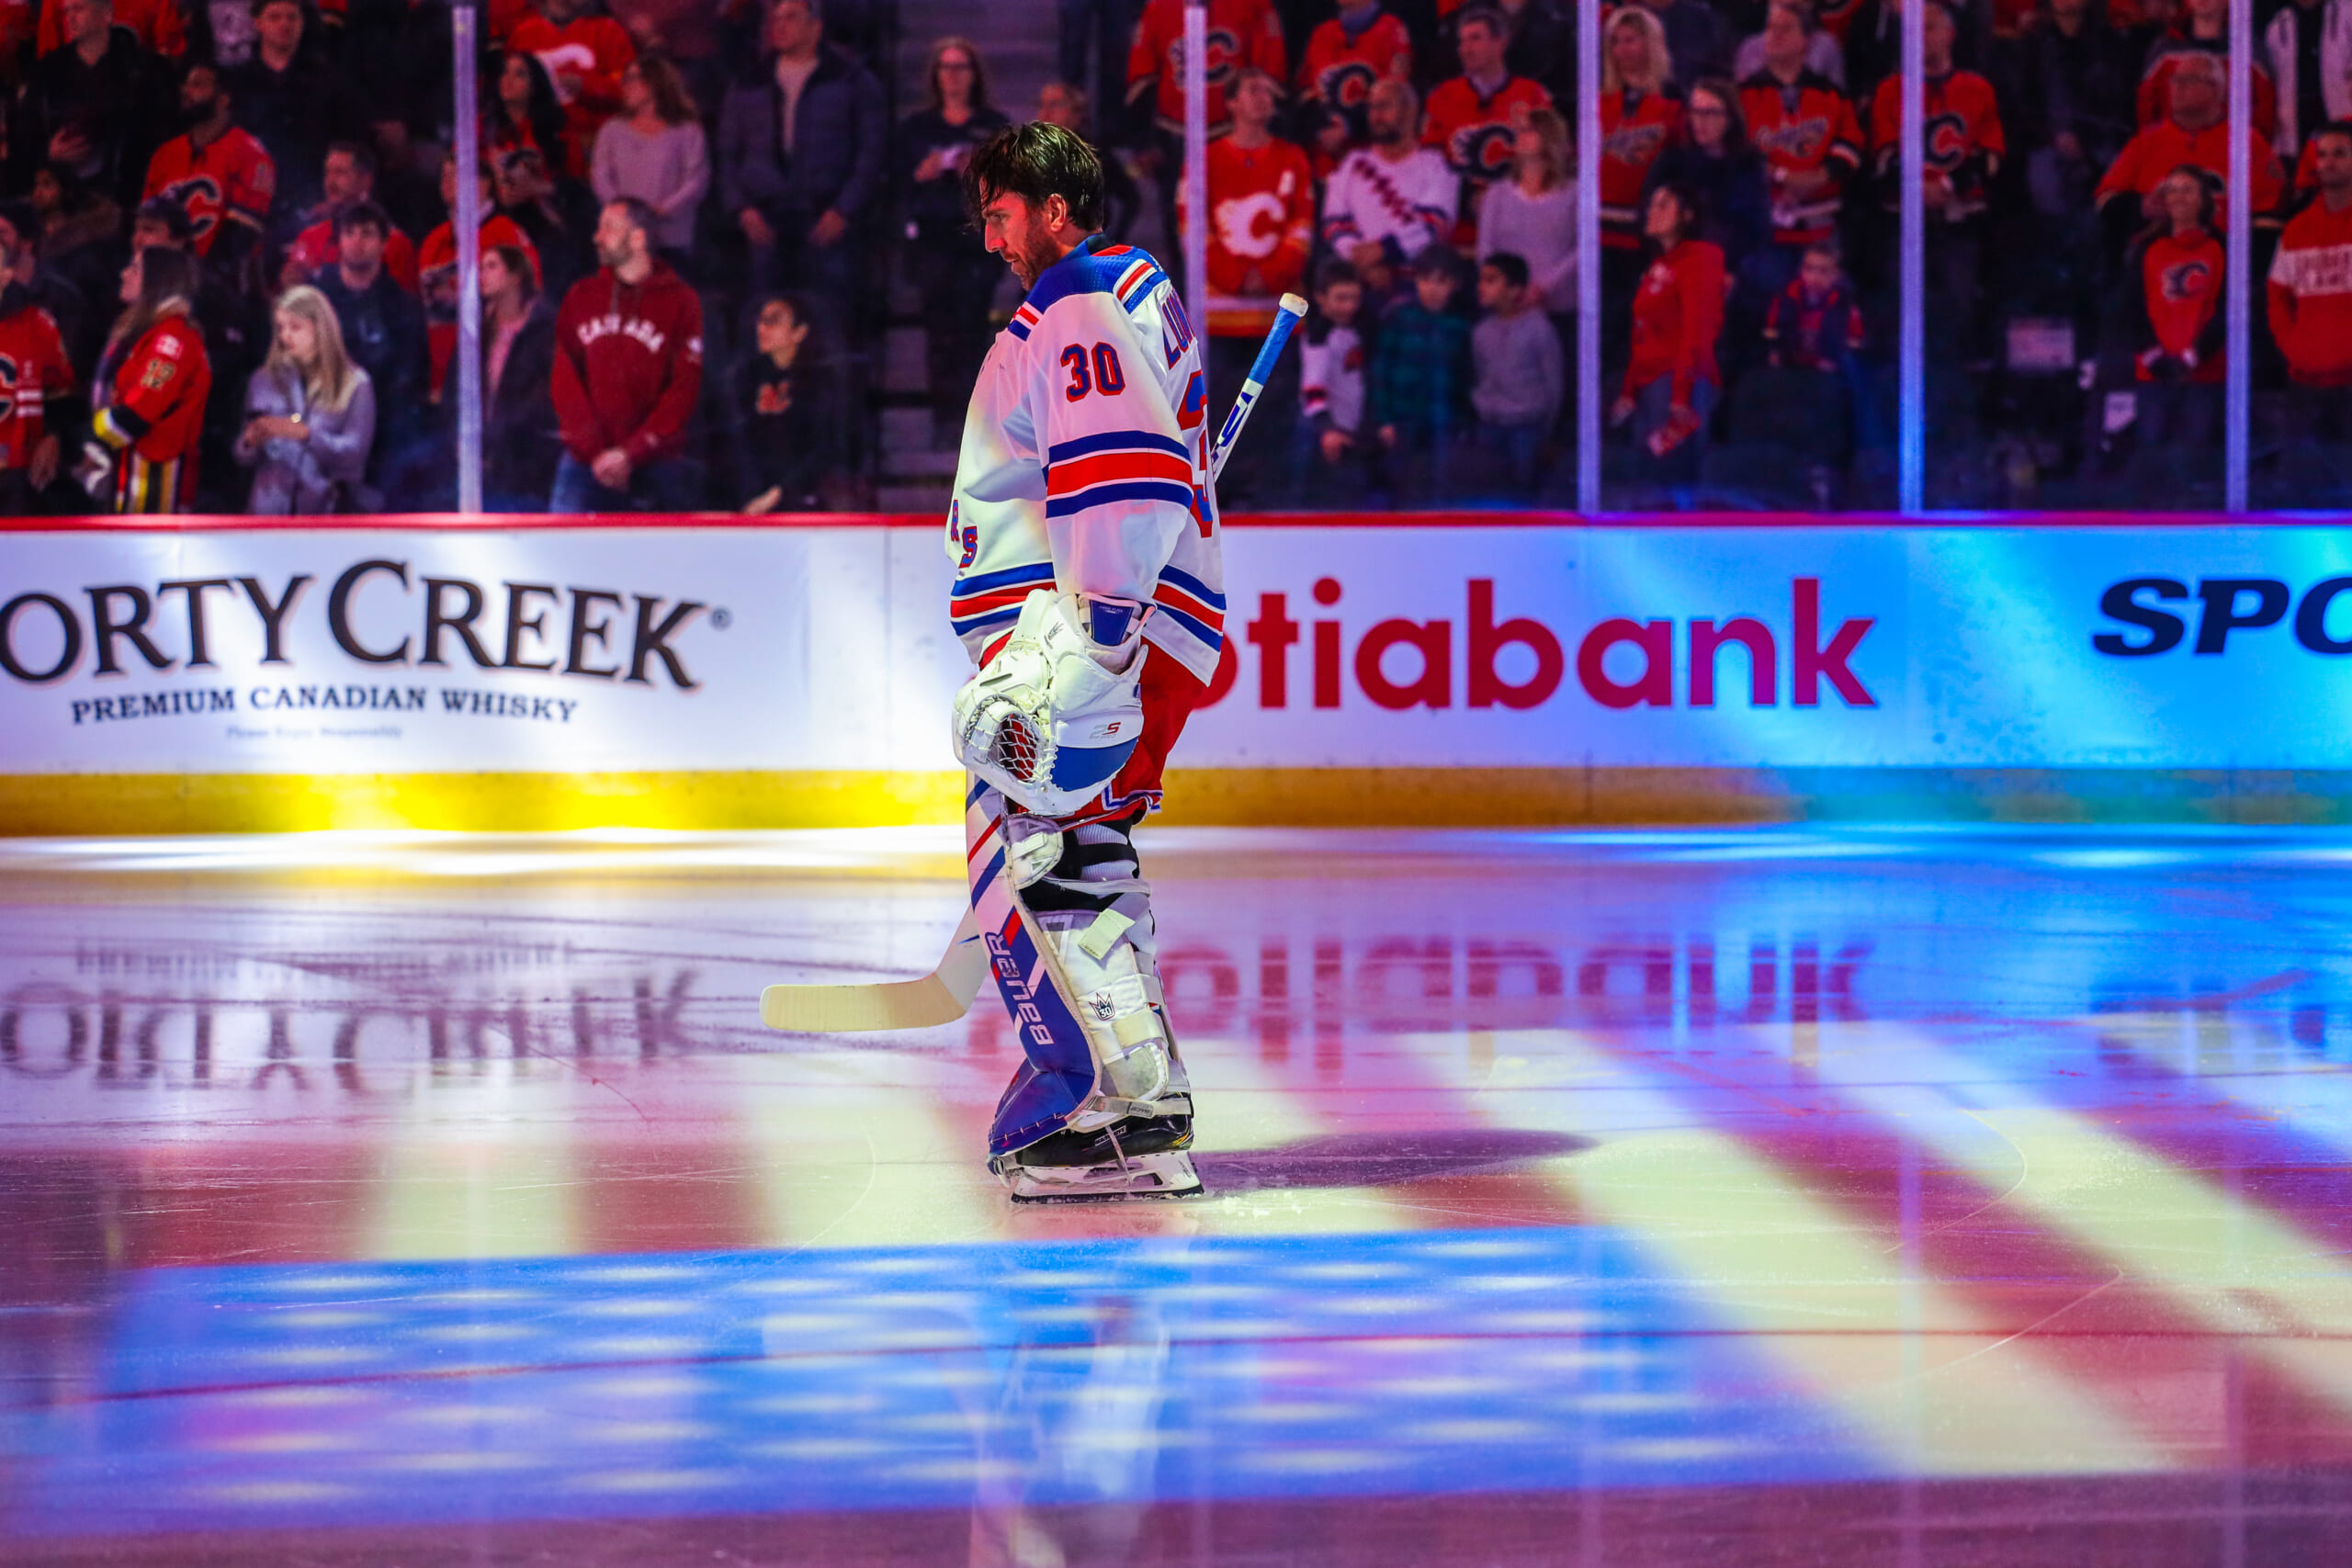 Rangers star Henrik Lundqvist leads group of 7 elected to Hockey Hall of Fame